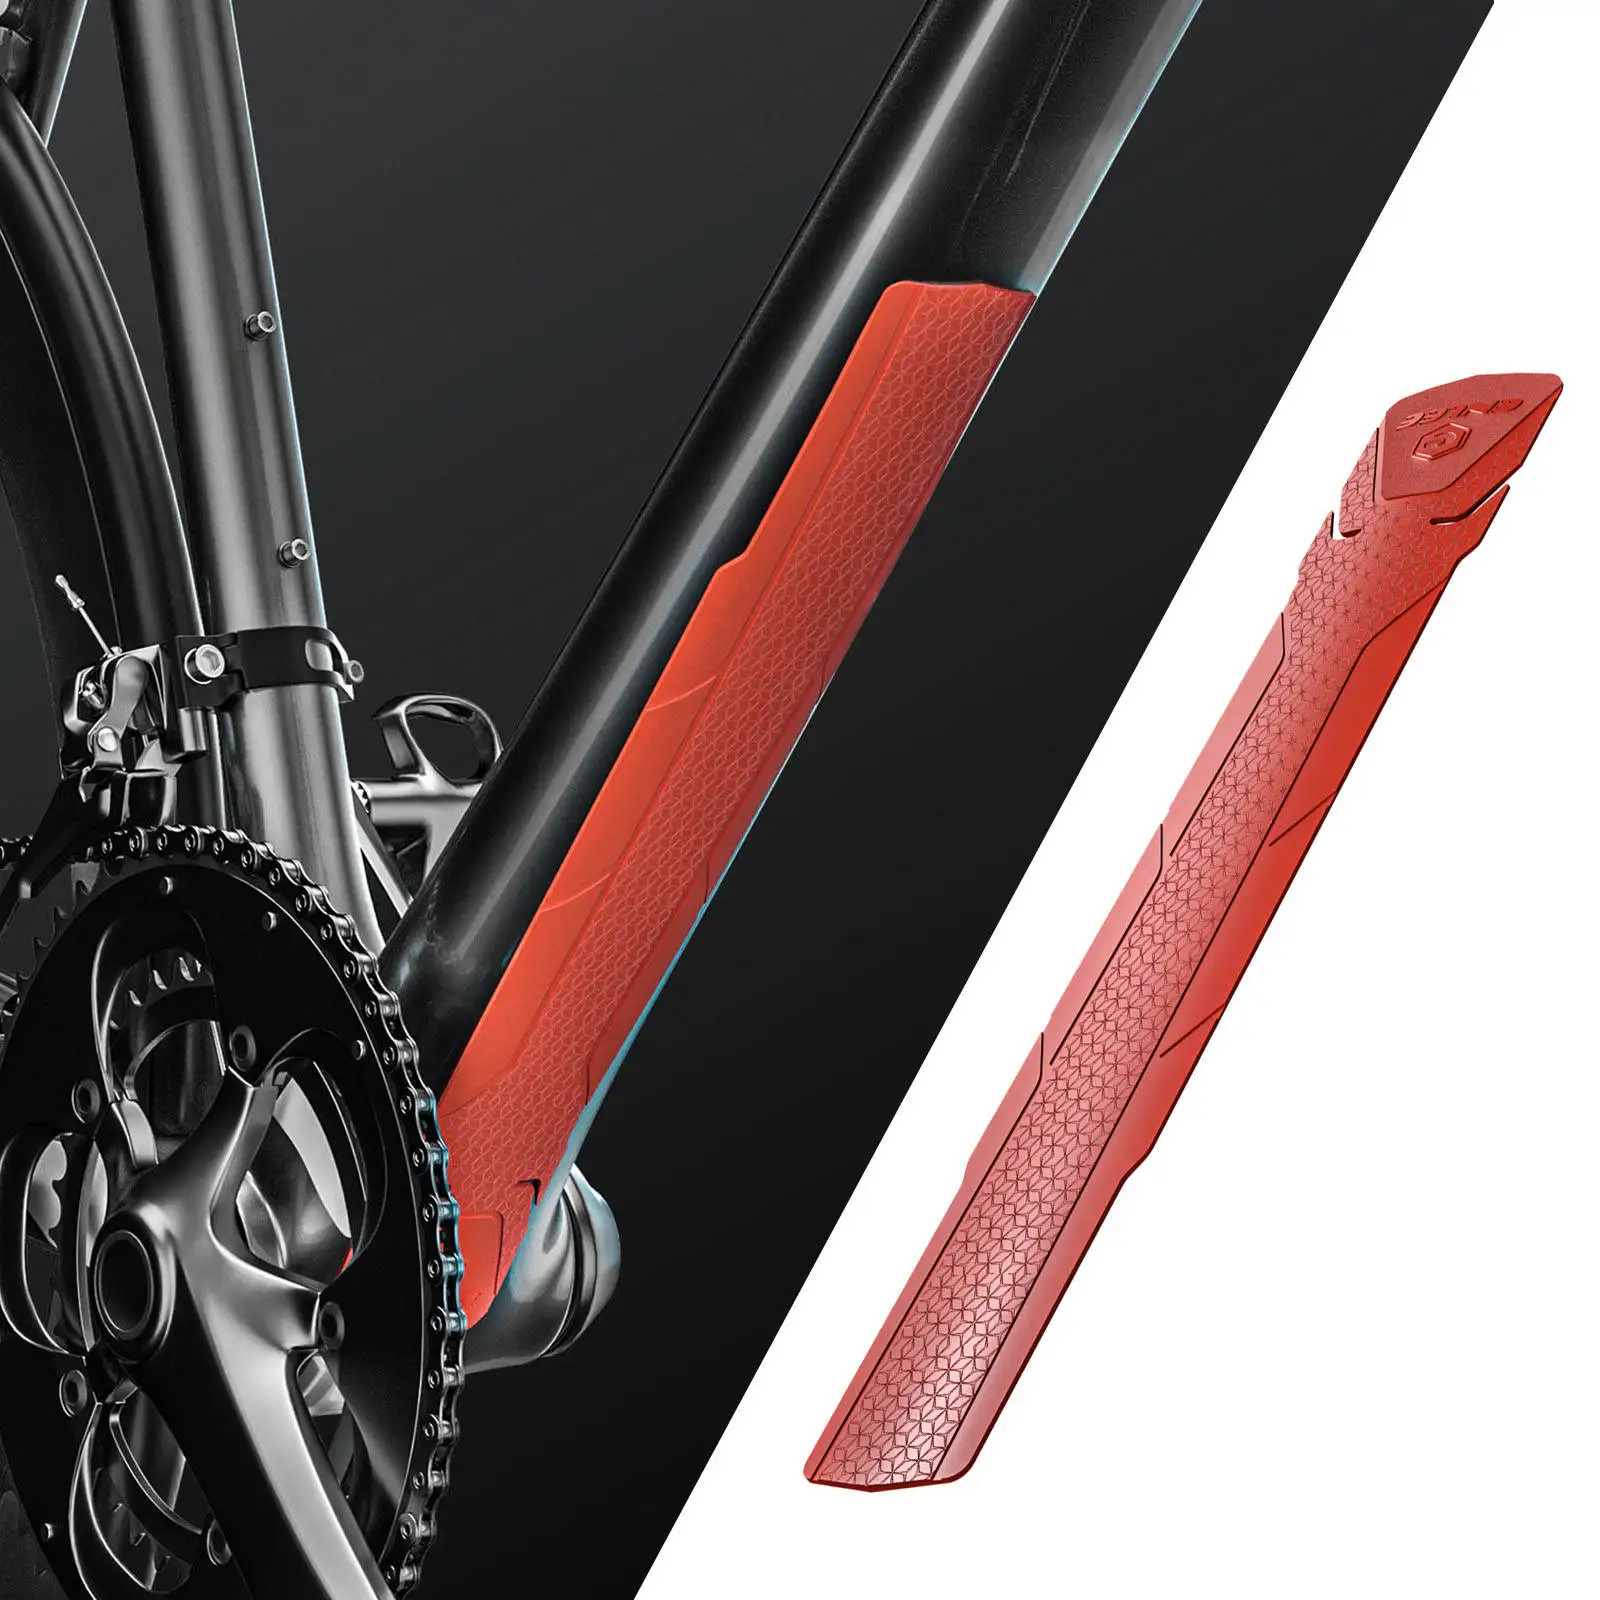 Bike Frame Protection Tape Decal Bike Frame Chain Protective Sticker for Bicycles